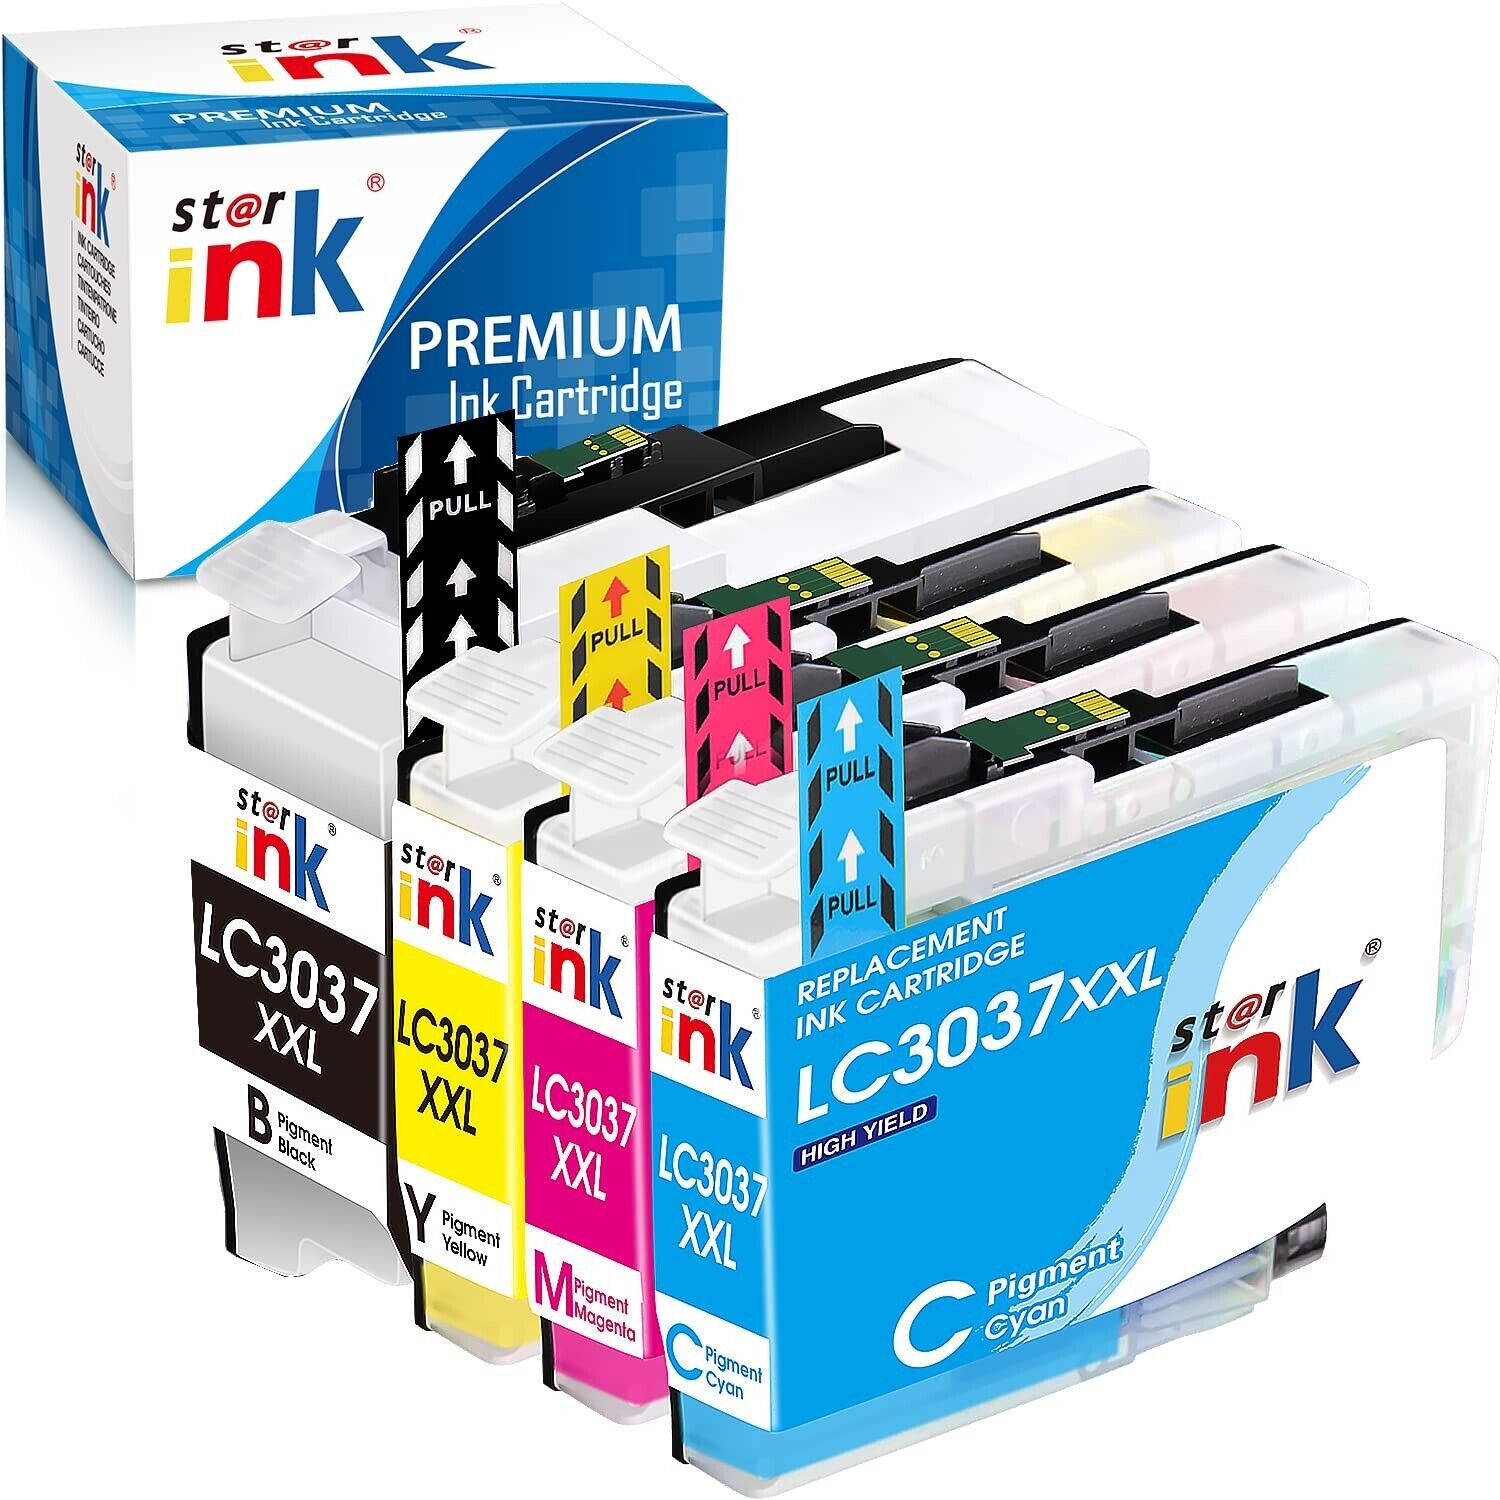 st@r ink LC3037 XXL Ink Cartridges Compatible Replacement for Brother LC-3037...